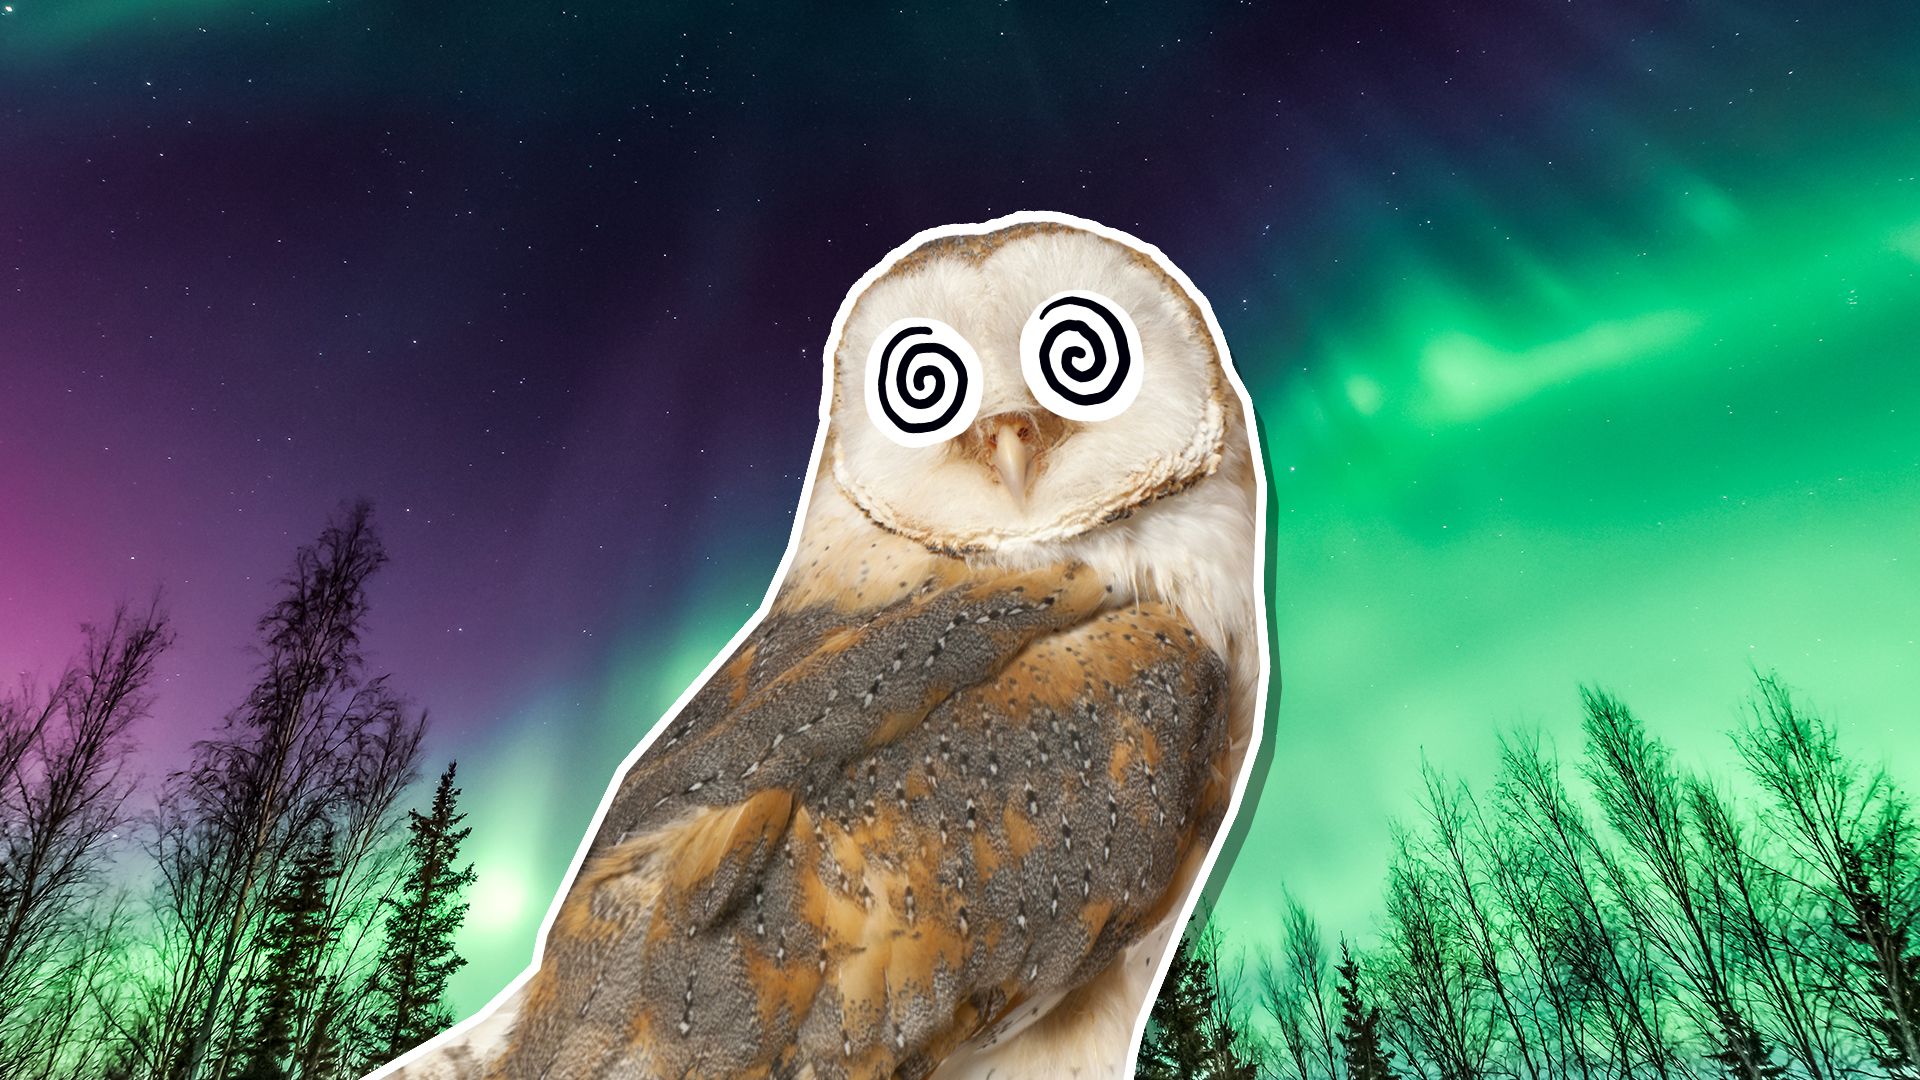 An owl against the Northern Lights